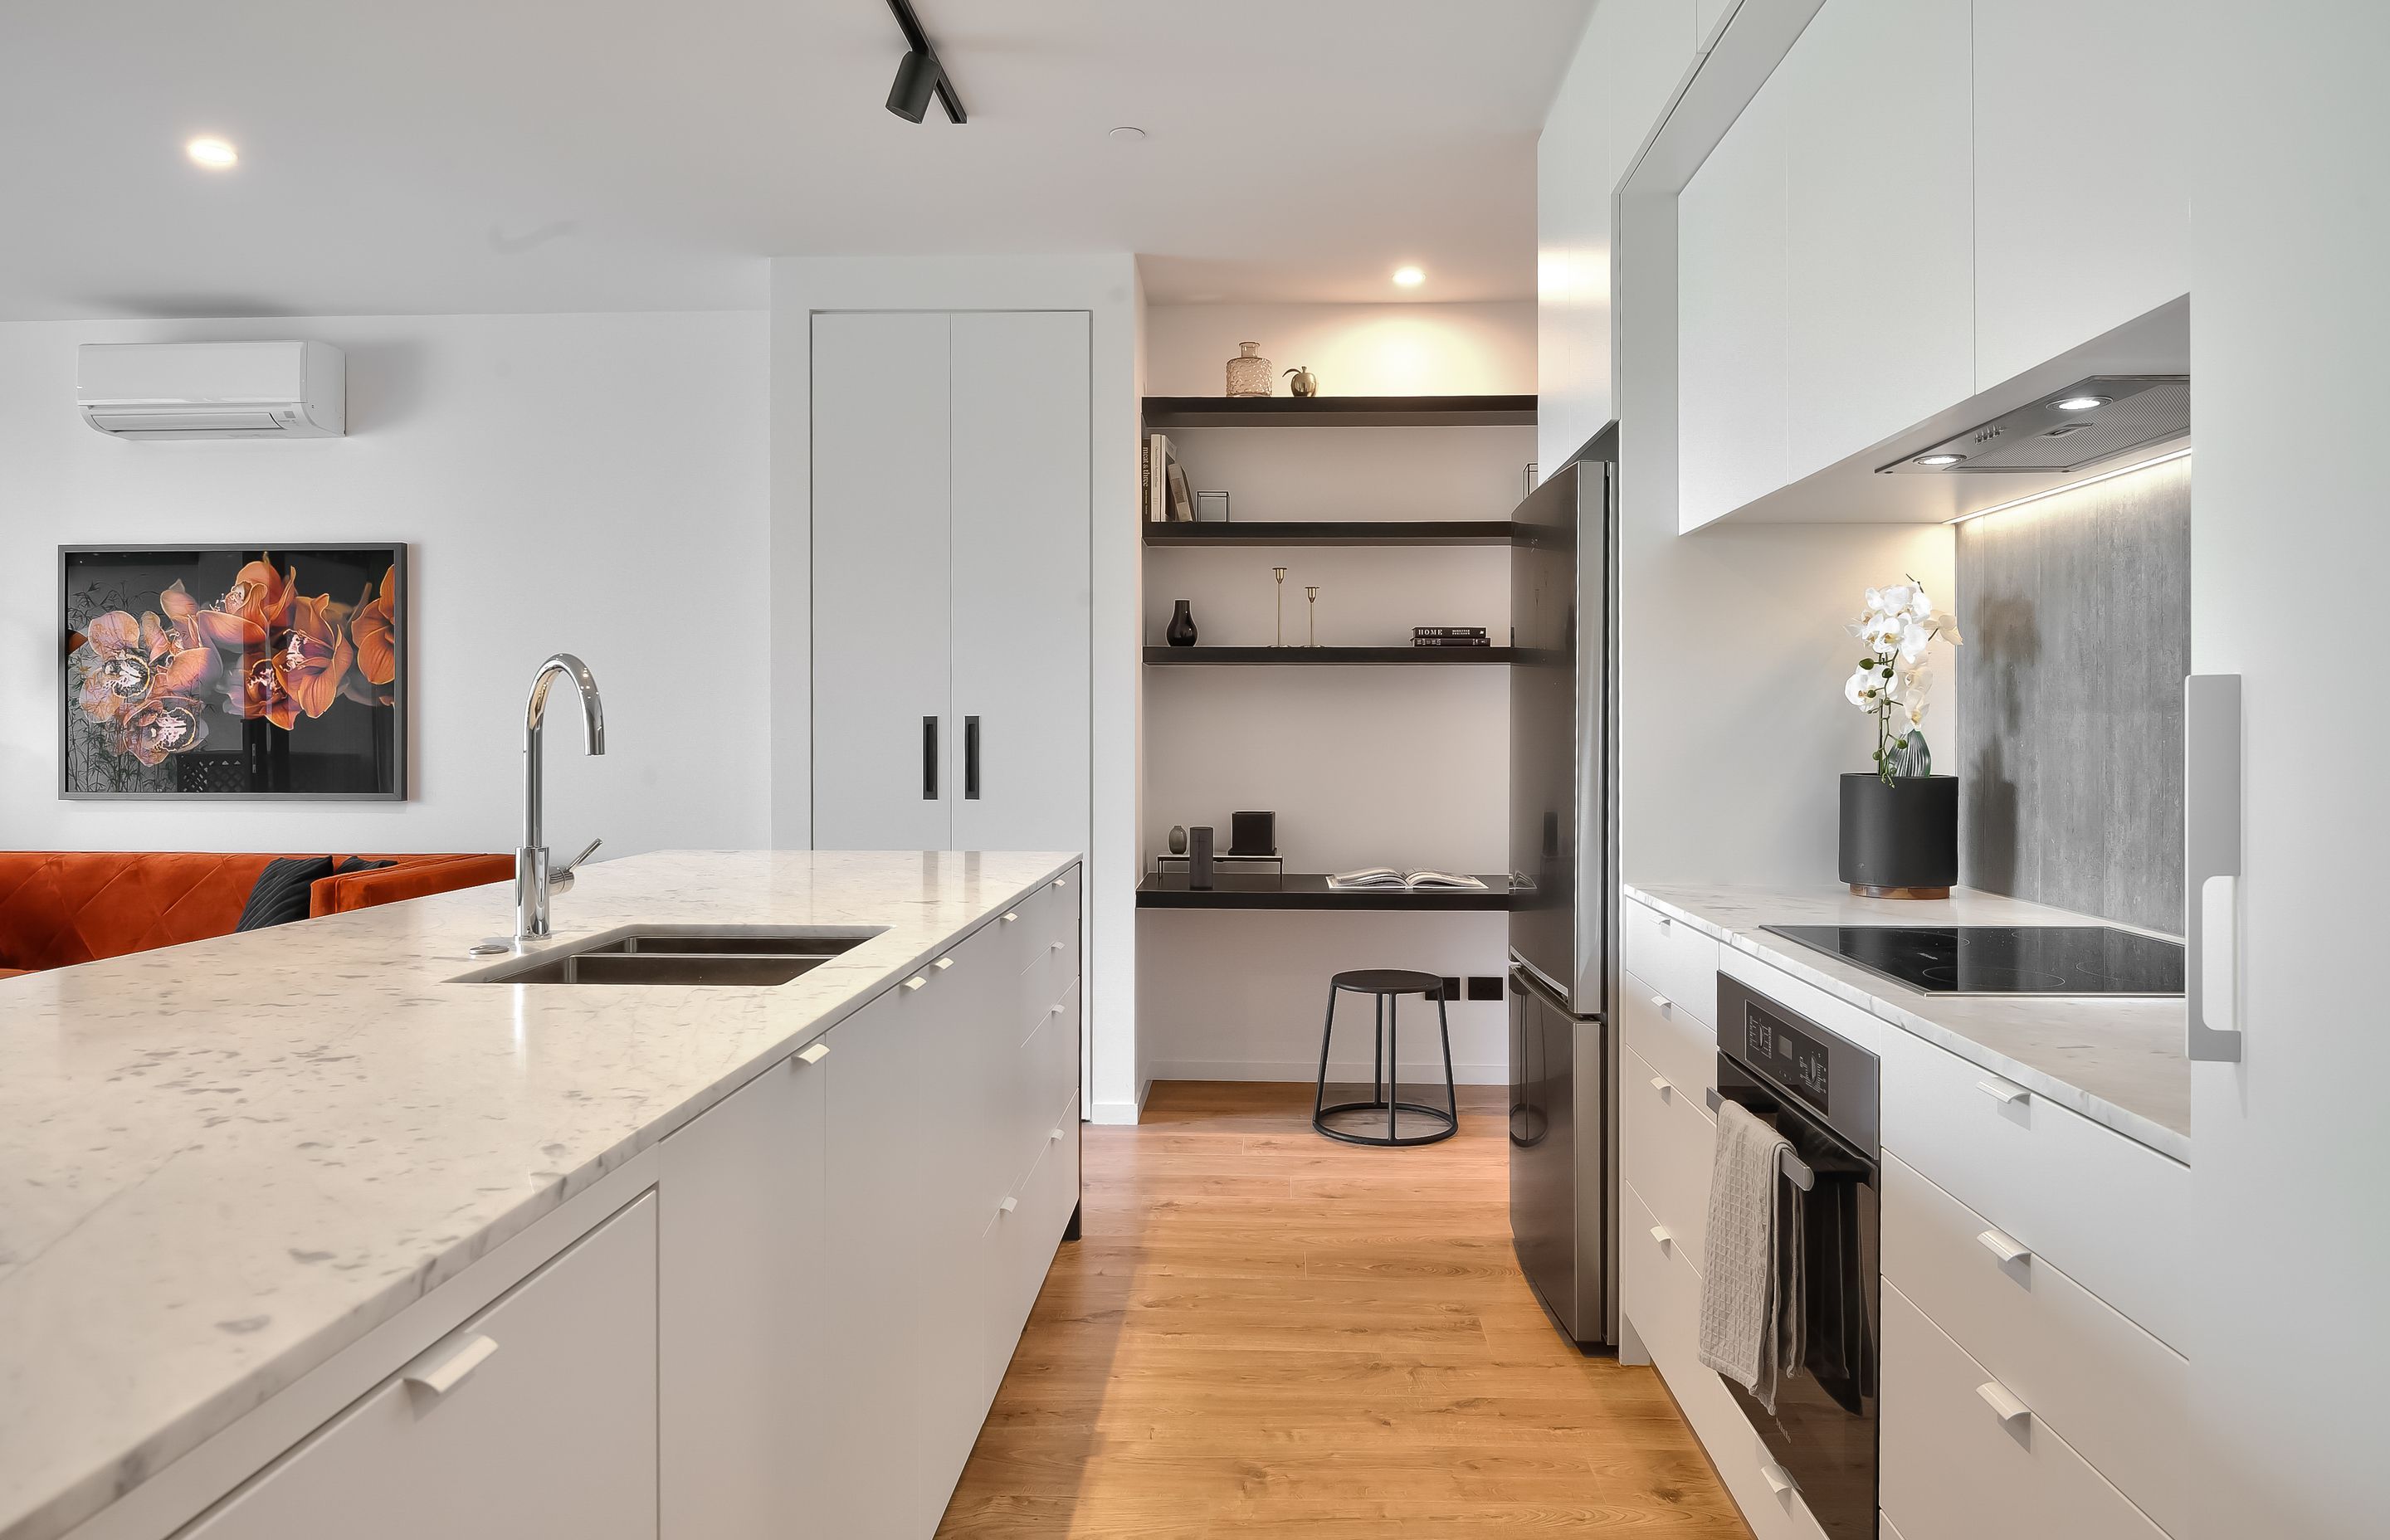 The interiors are sleek and edgy,  juxtaposing glossy and textured materials. Timber floors, concrete-look tiles and matte kitchen cabinetry complete the look.